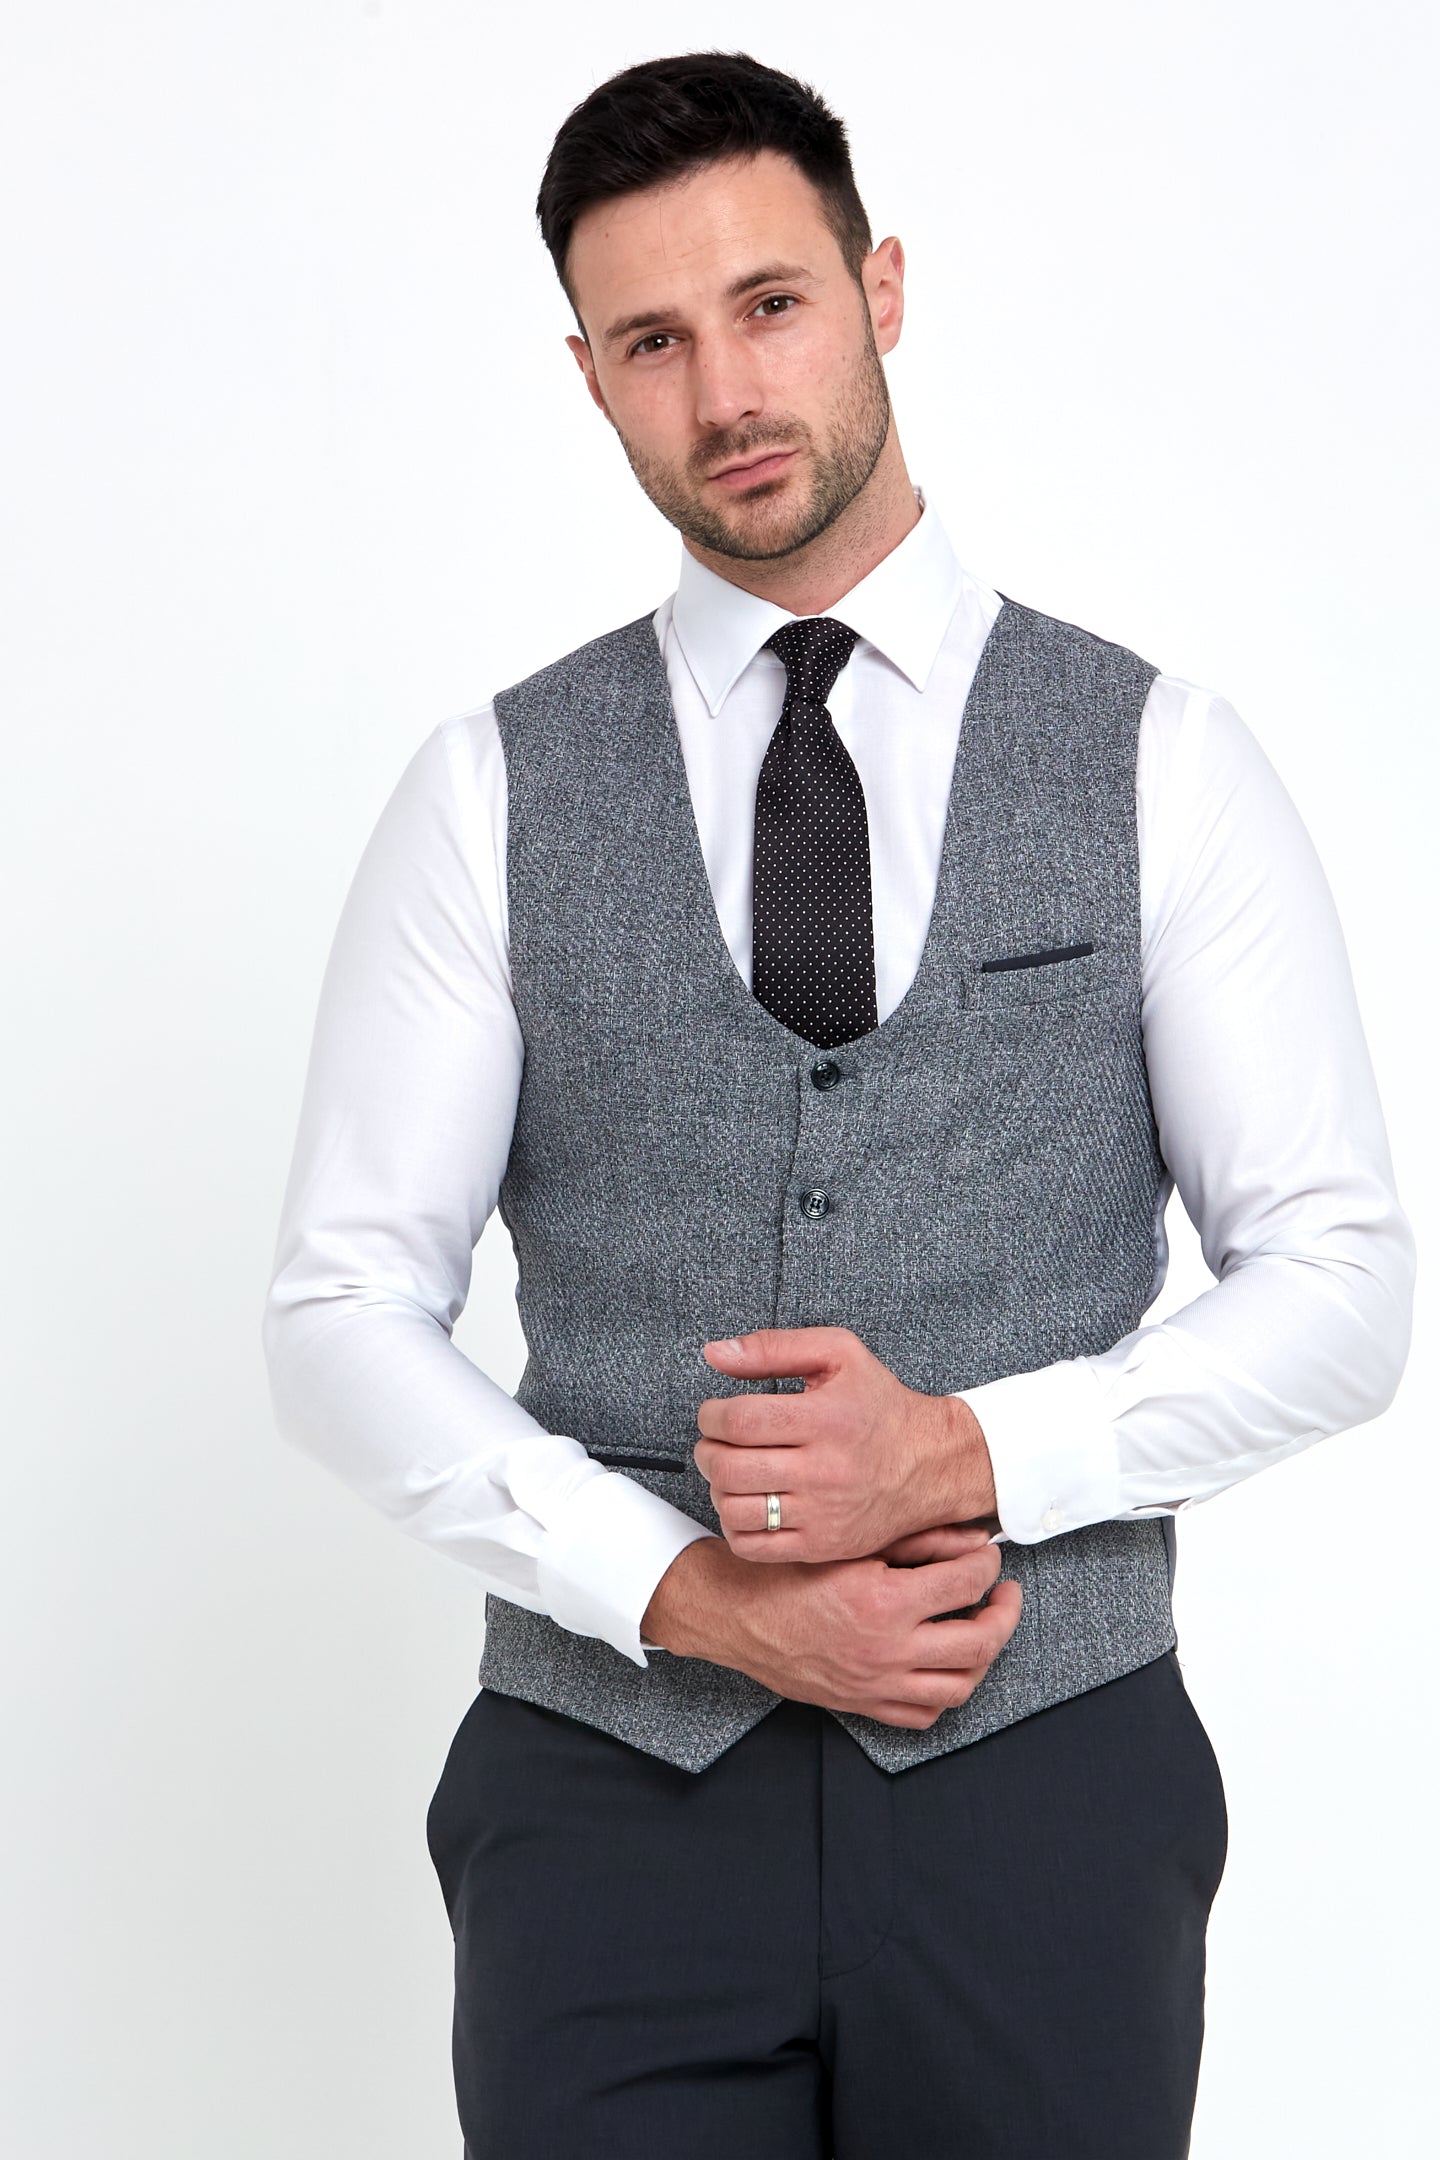 Simon Tapered Fit Charcoal Waistcoat - Spirit Clothing